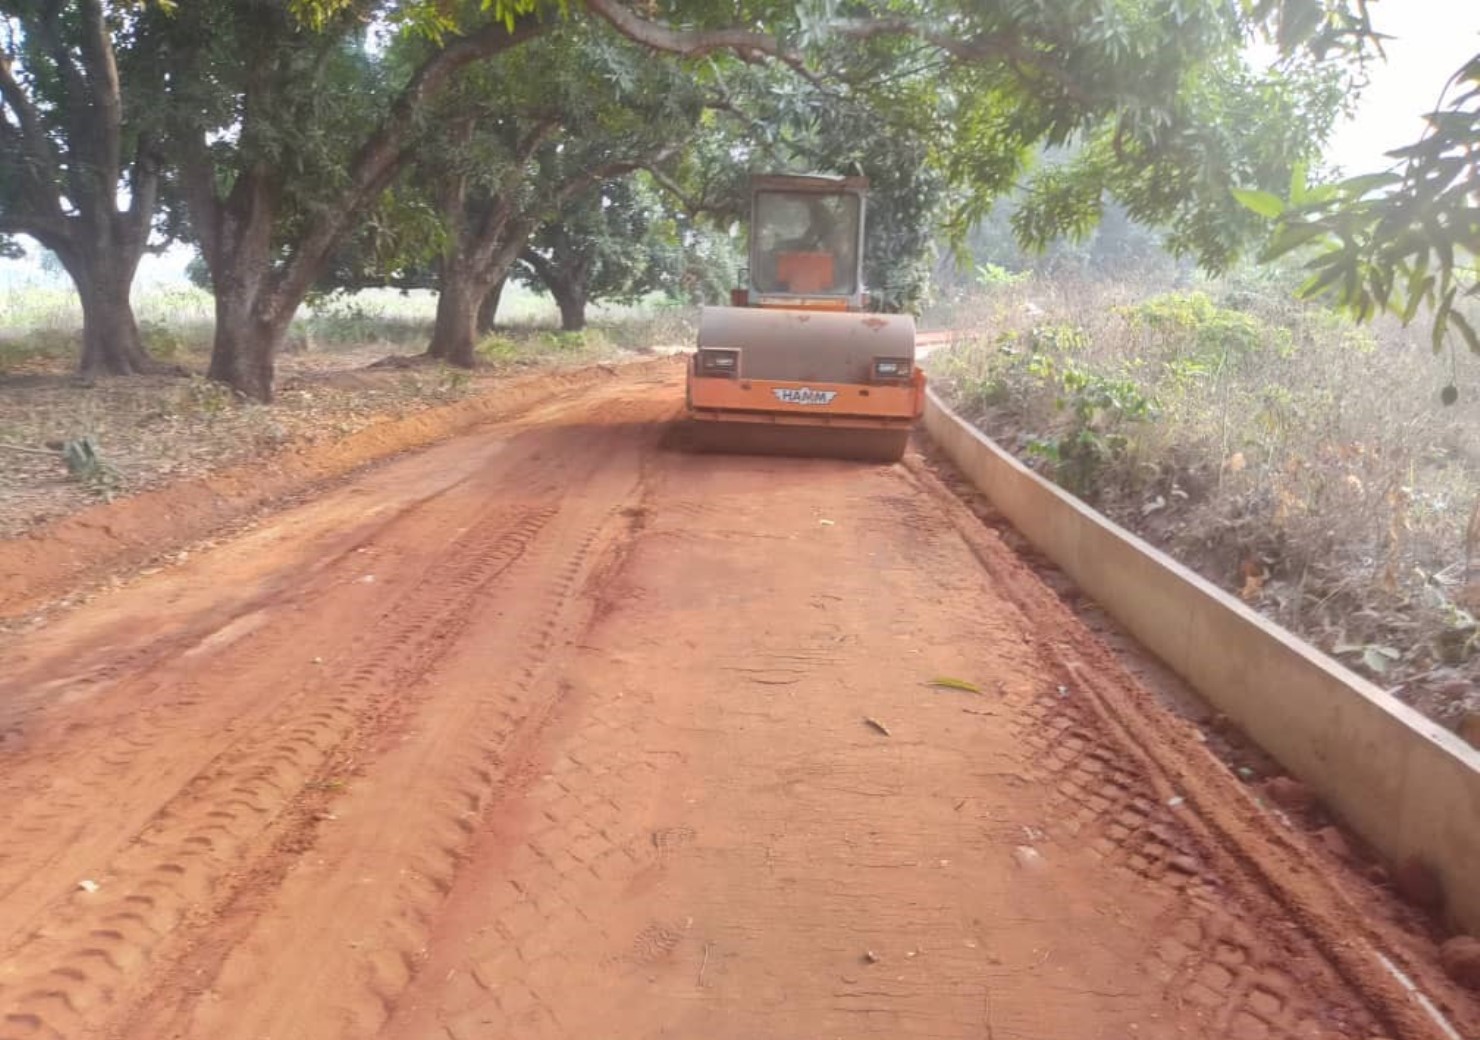 Construction of Farm Access Roads for some communities in Niger State